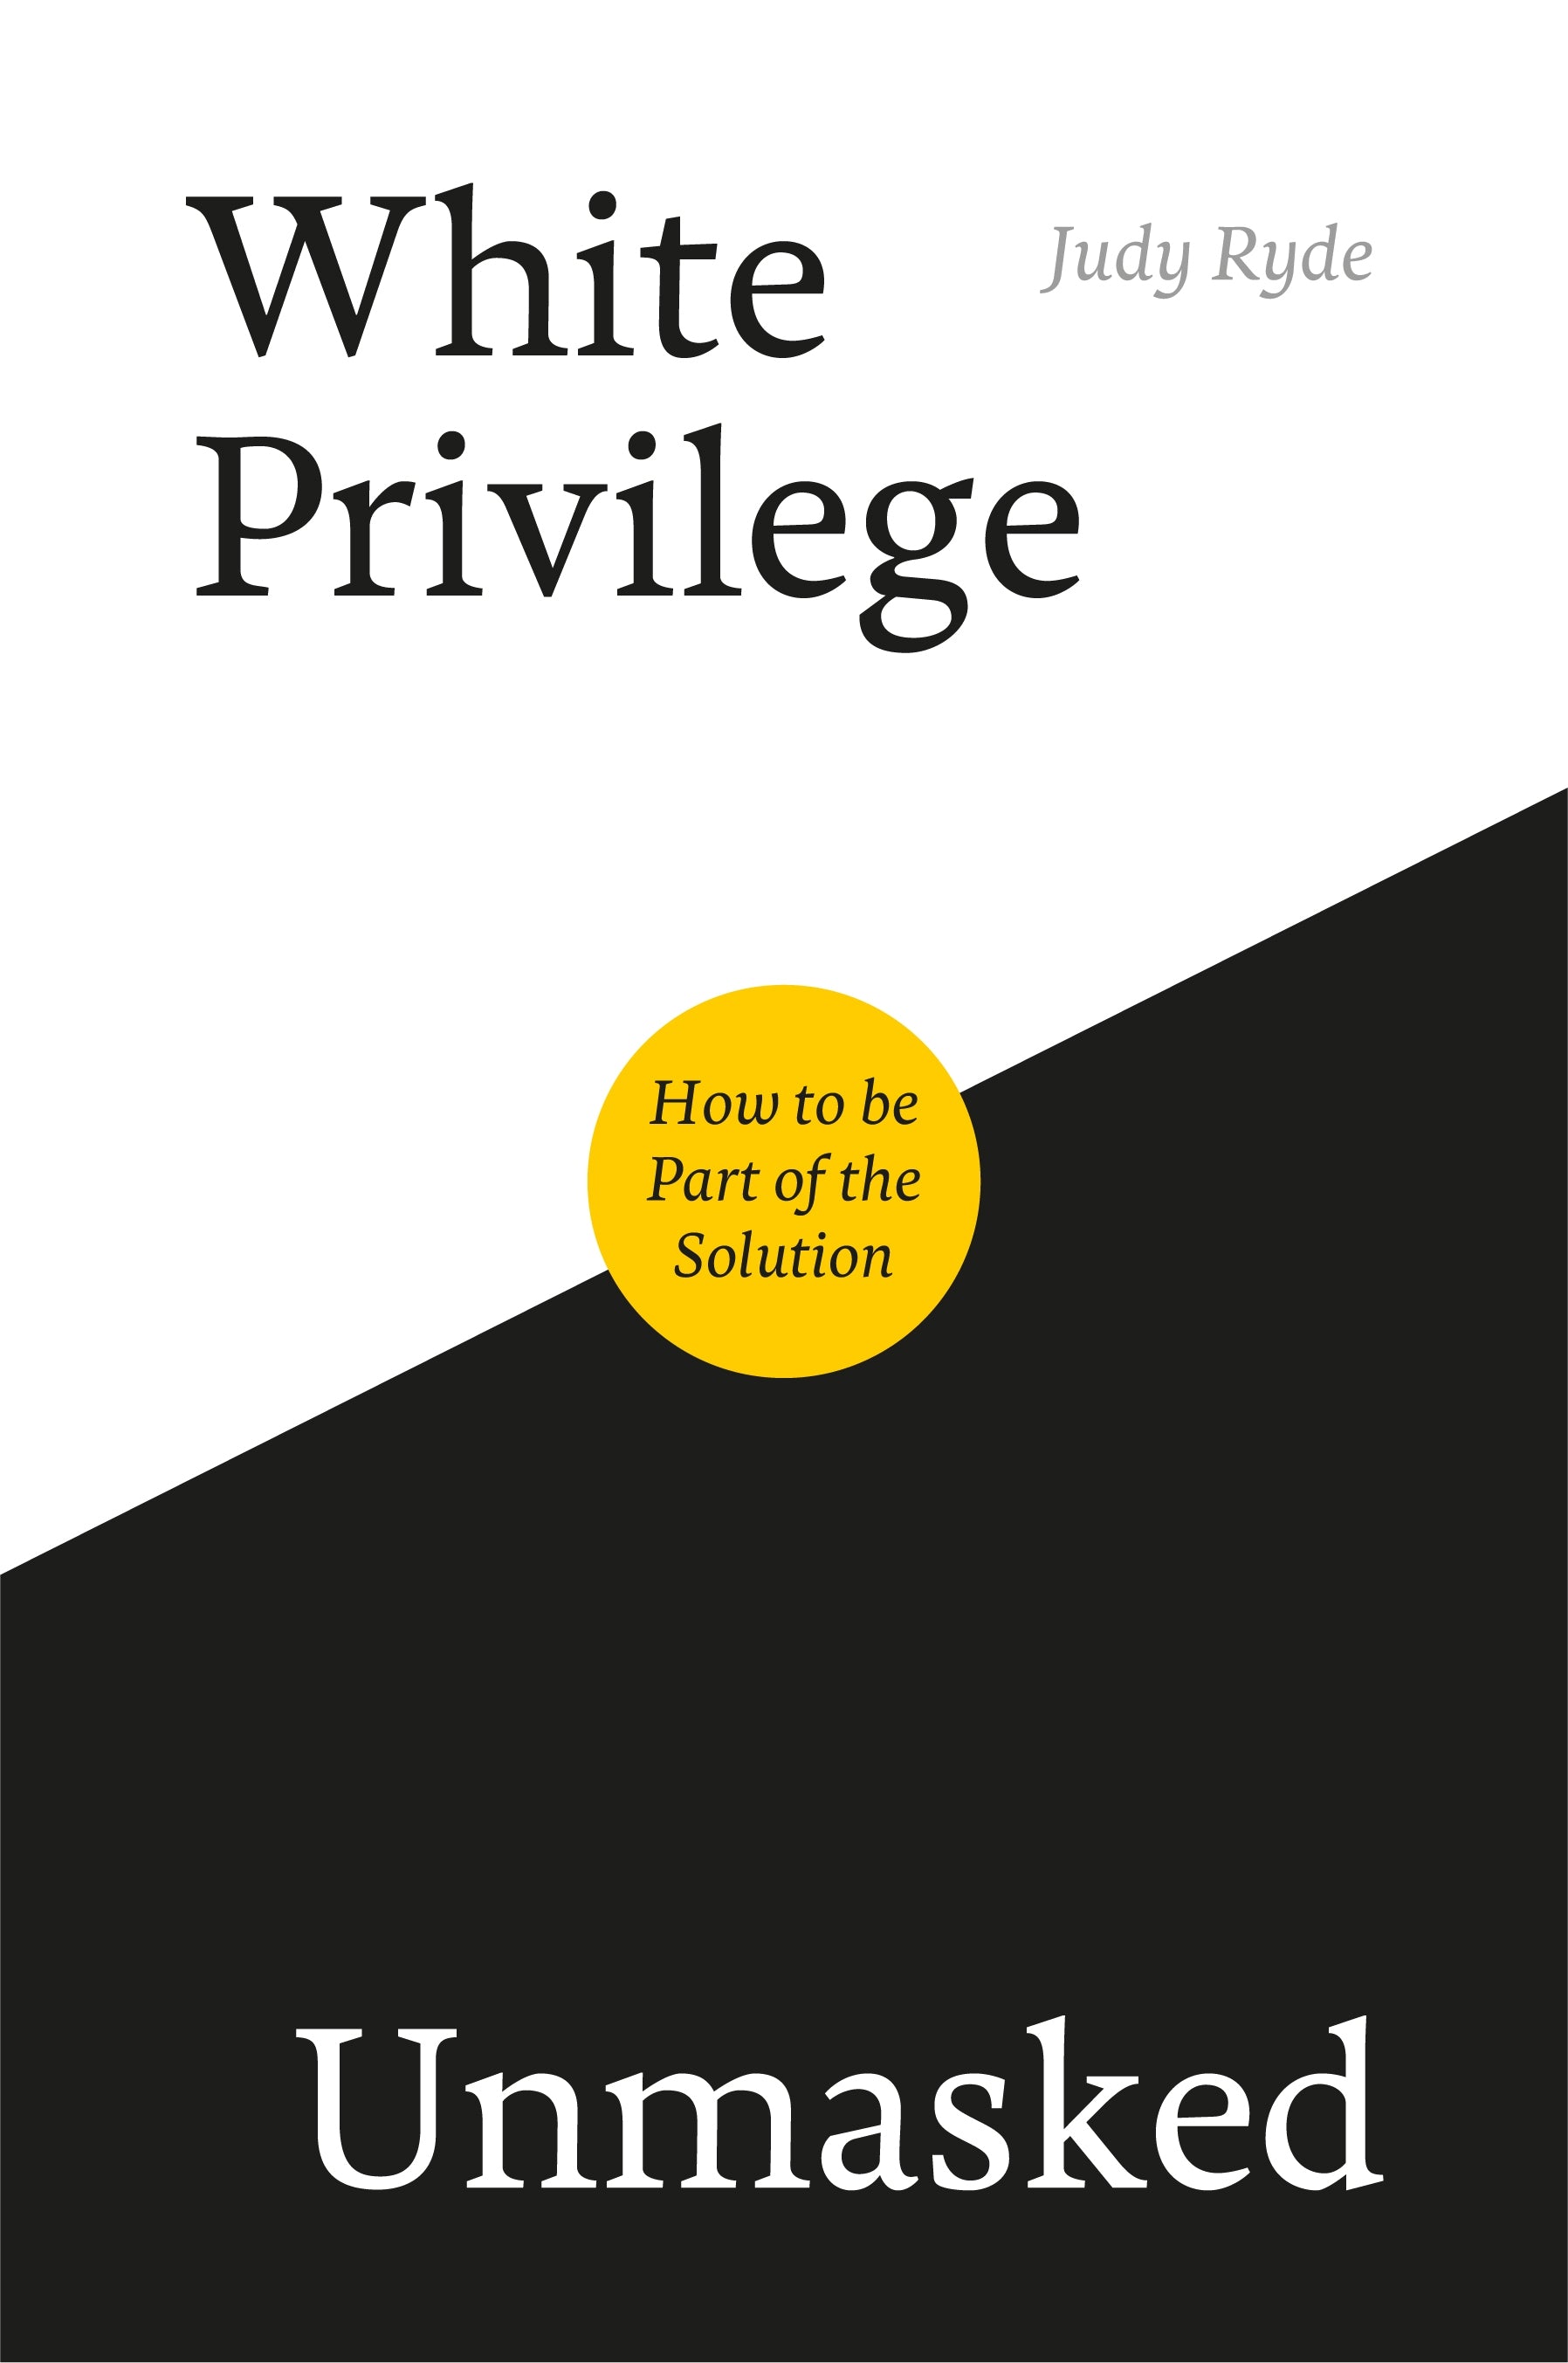 White Privilege Unmasked by Judy Ryde